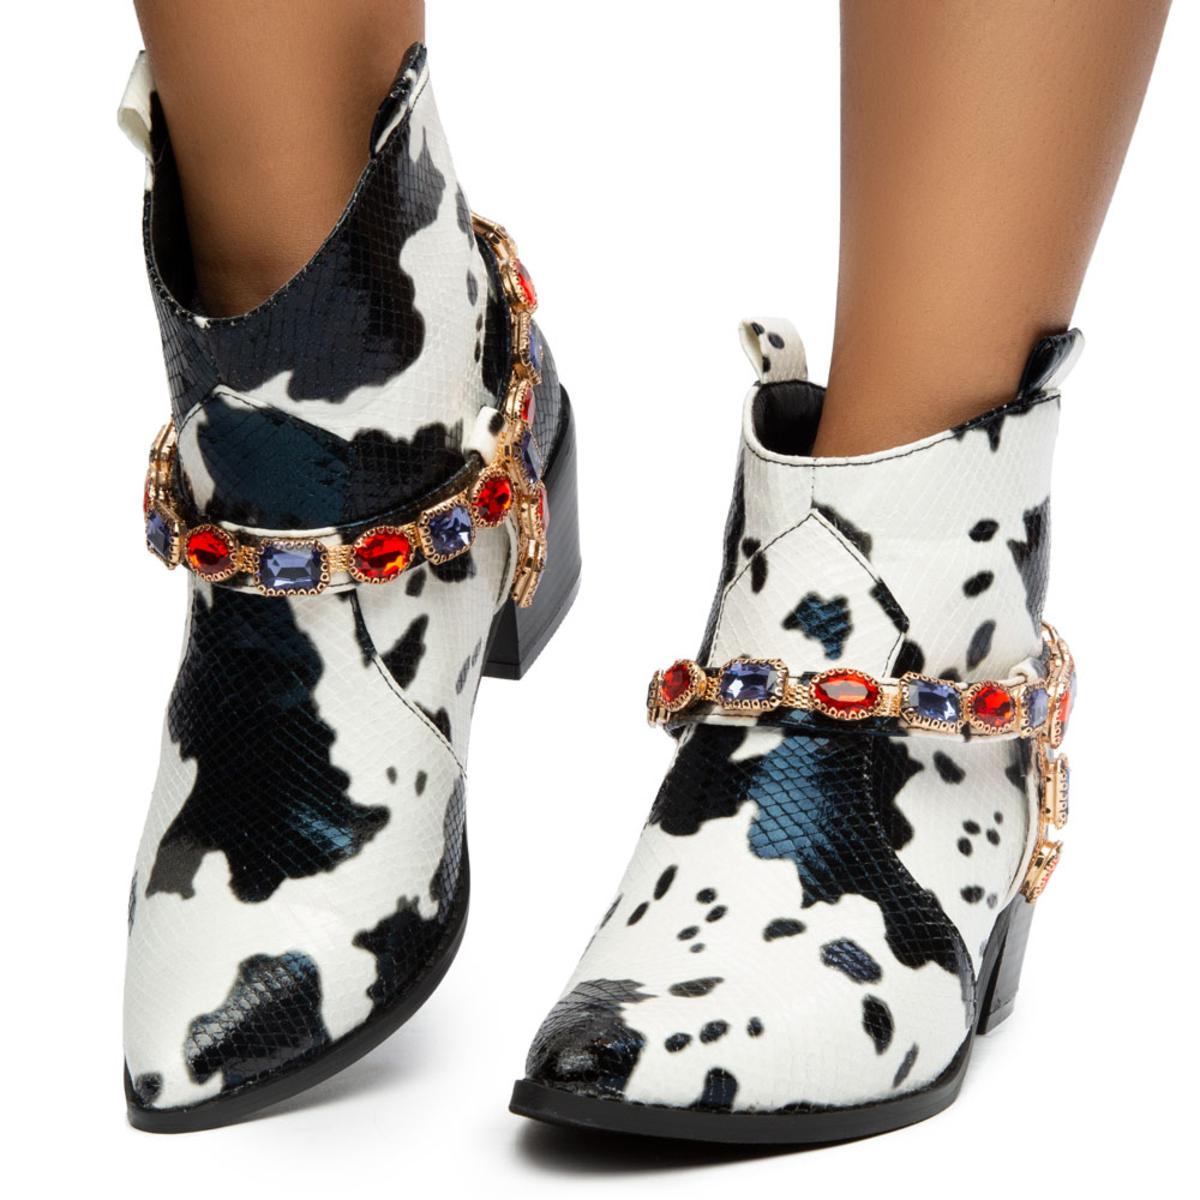 Kaly-1 Cow Print and Gems Boots